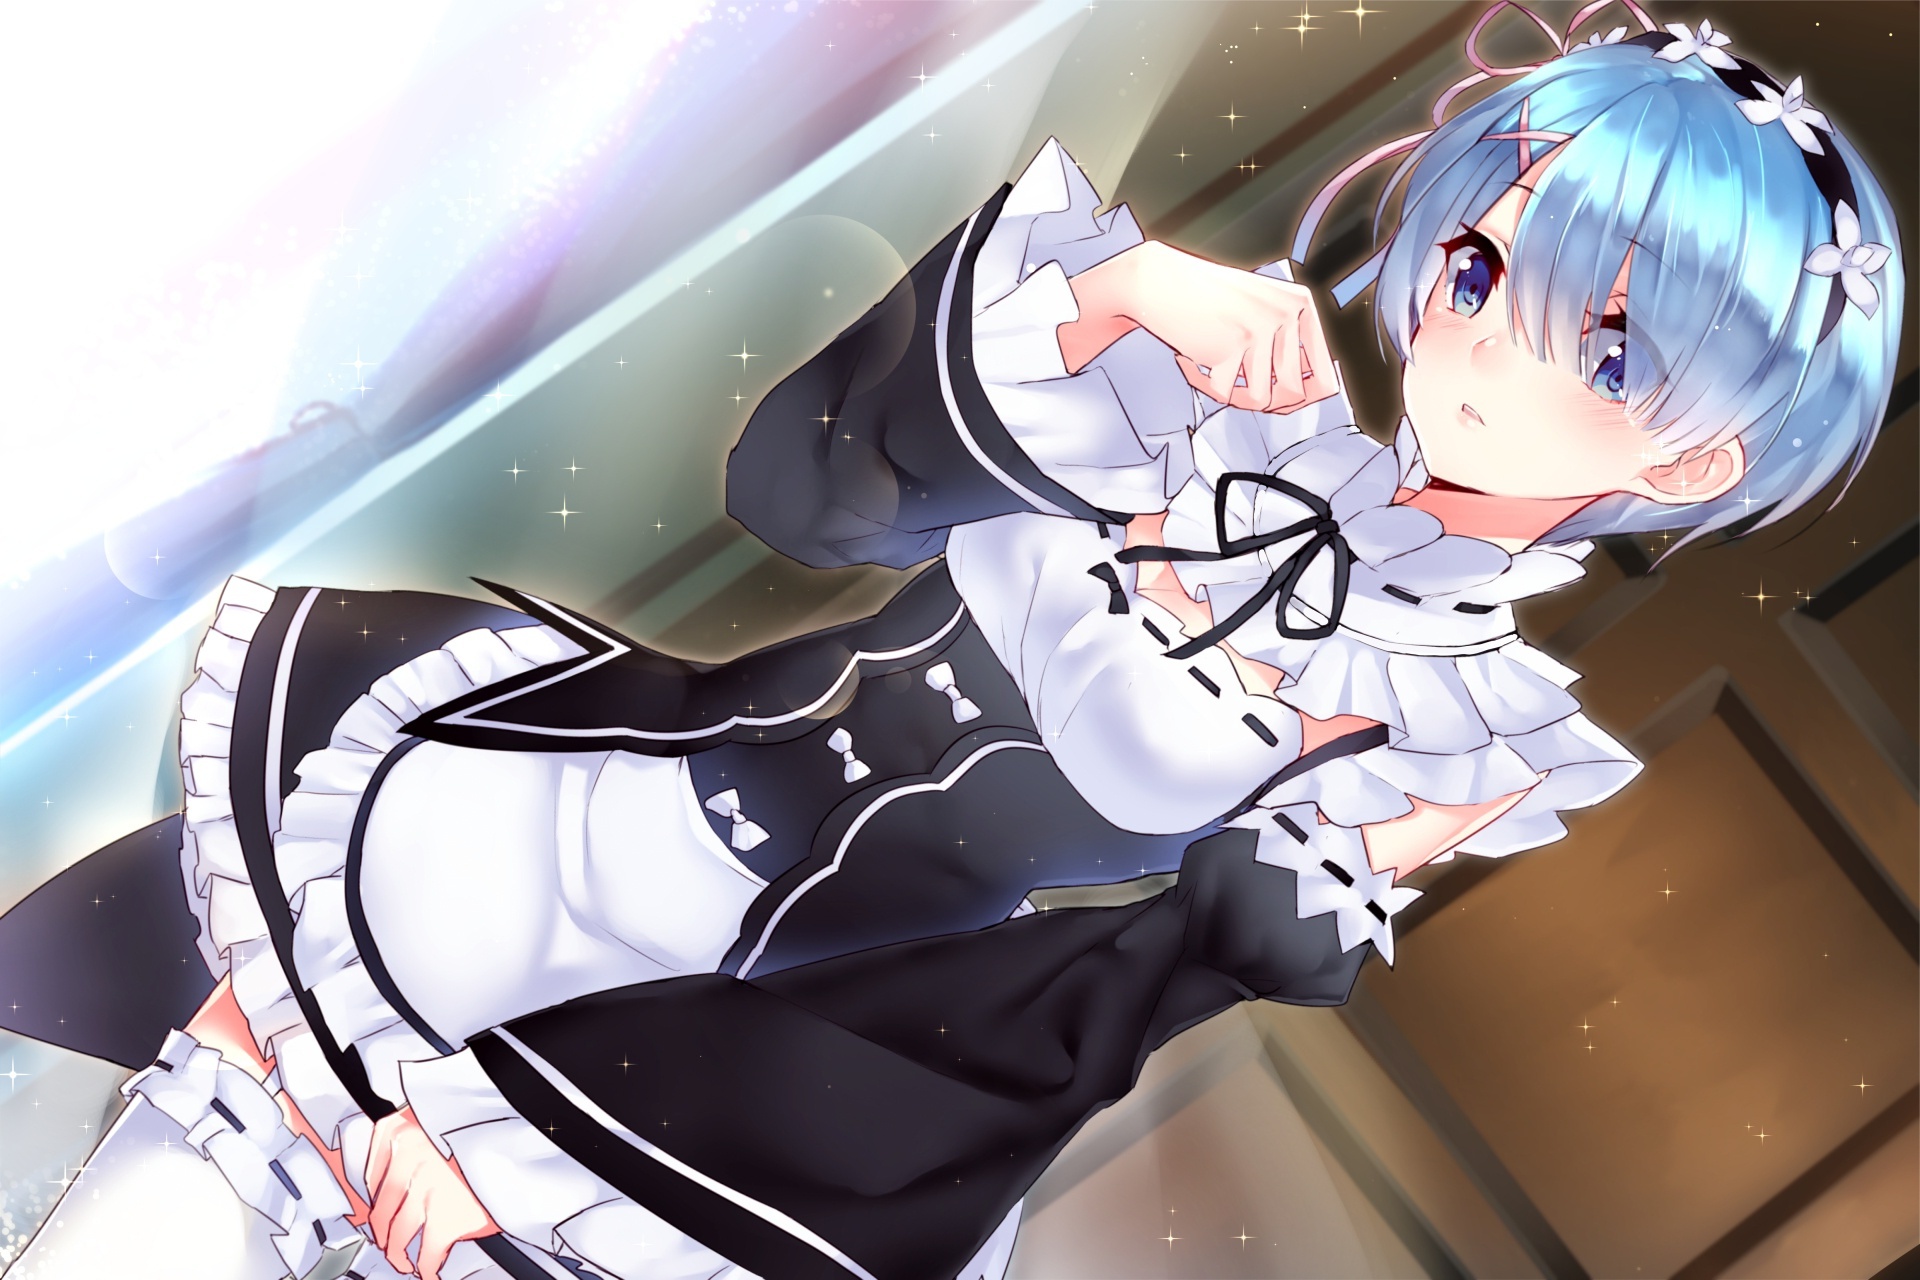 Blue-haired neko loli with a maid outfit - wide 7